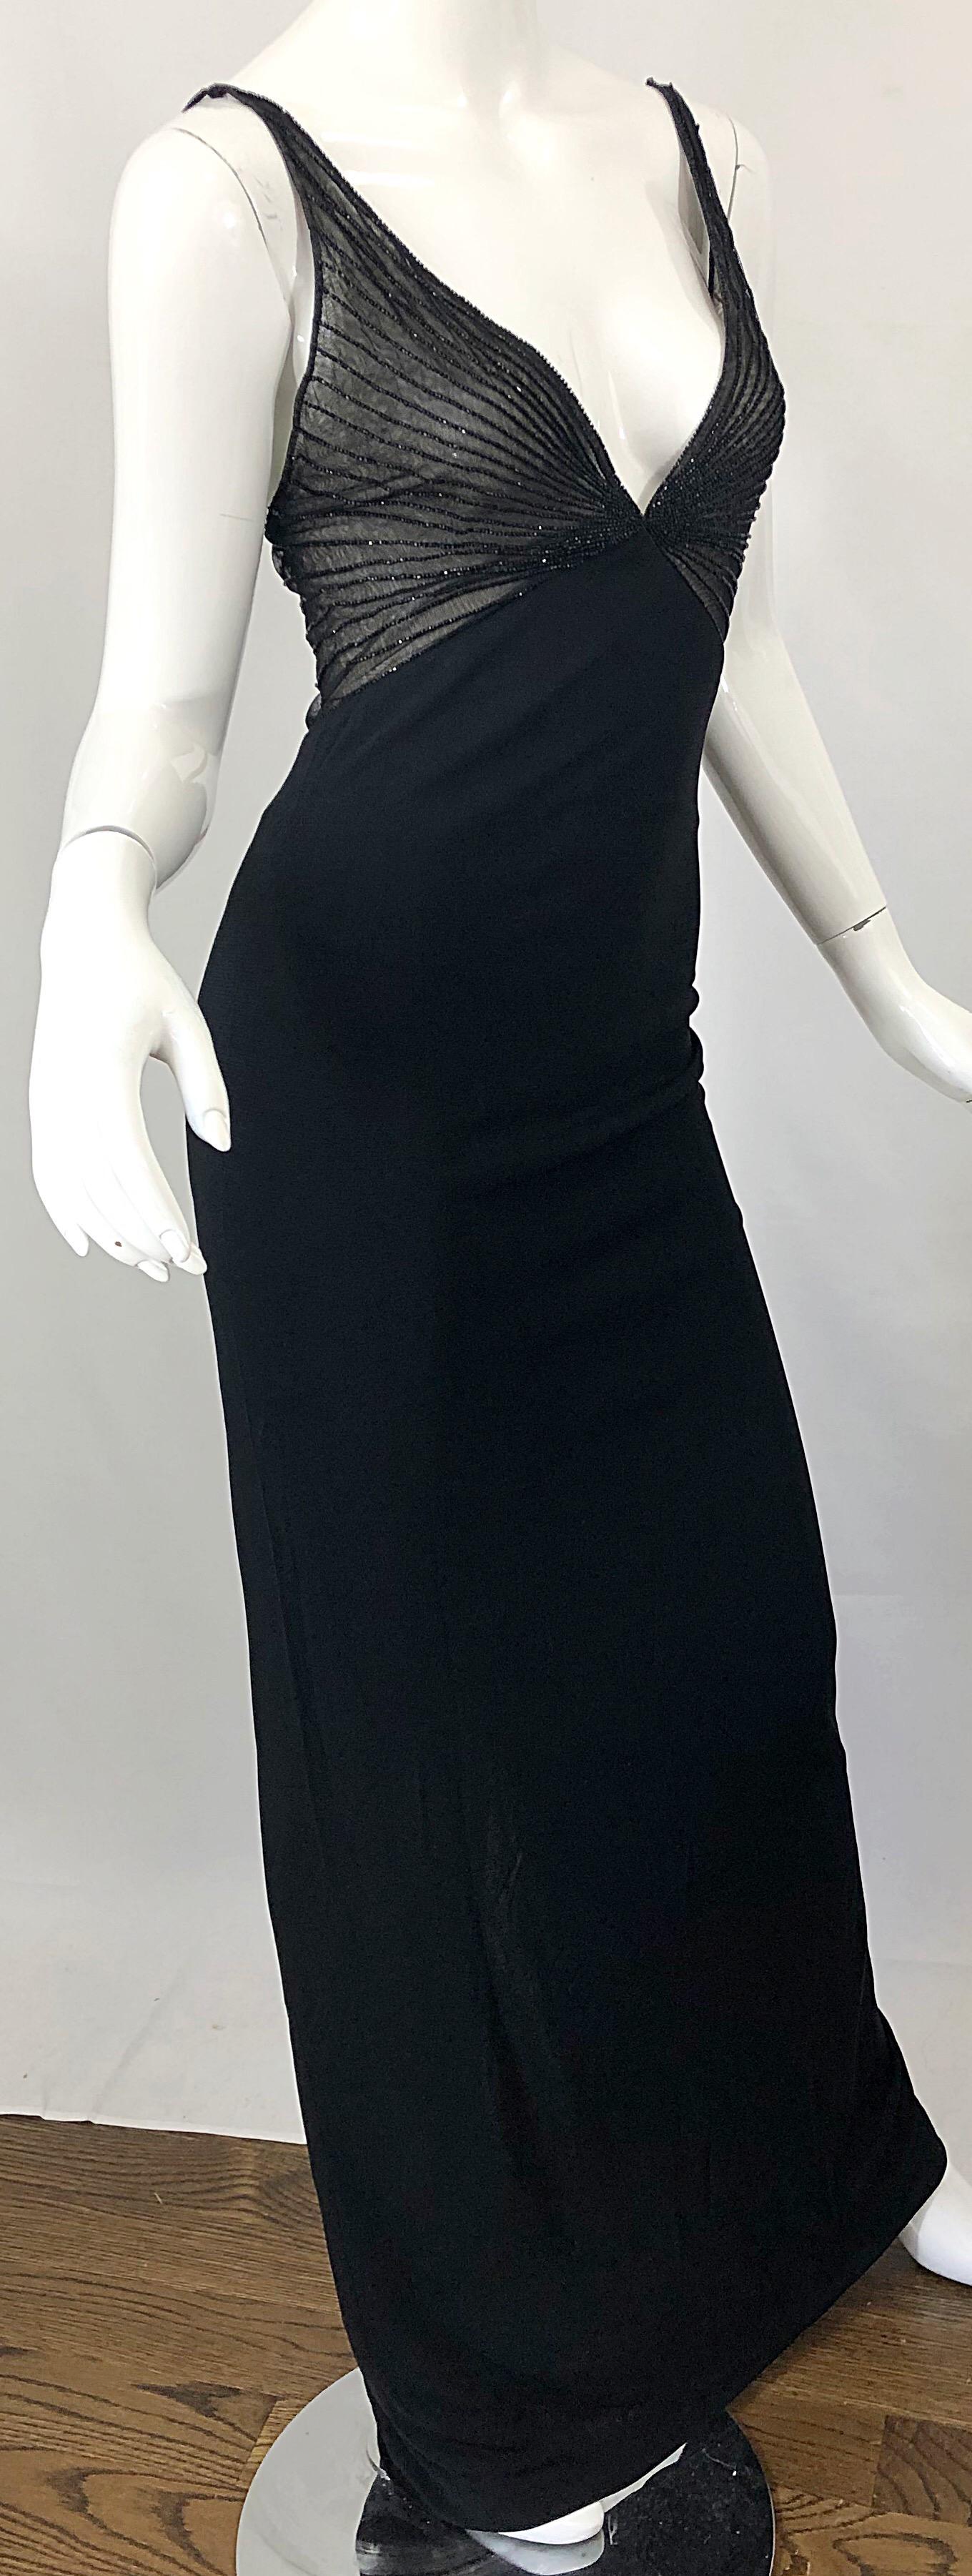 NWT 1990s Randolph Duke Couture Size 12 Black 90s Plunging Semi Sheer Gown Dress 11